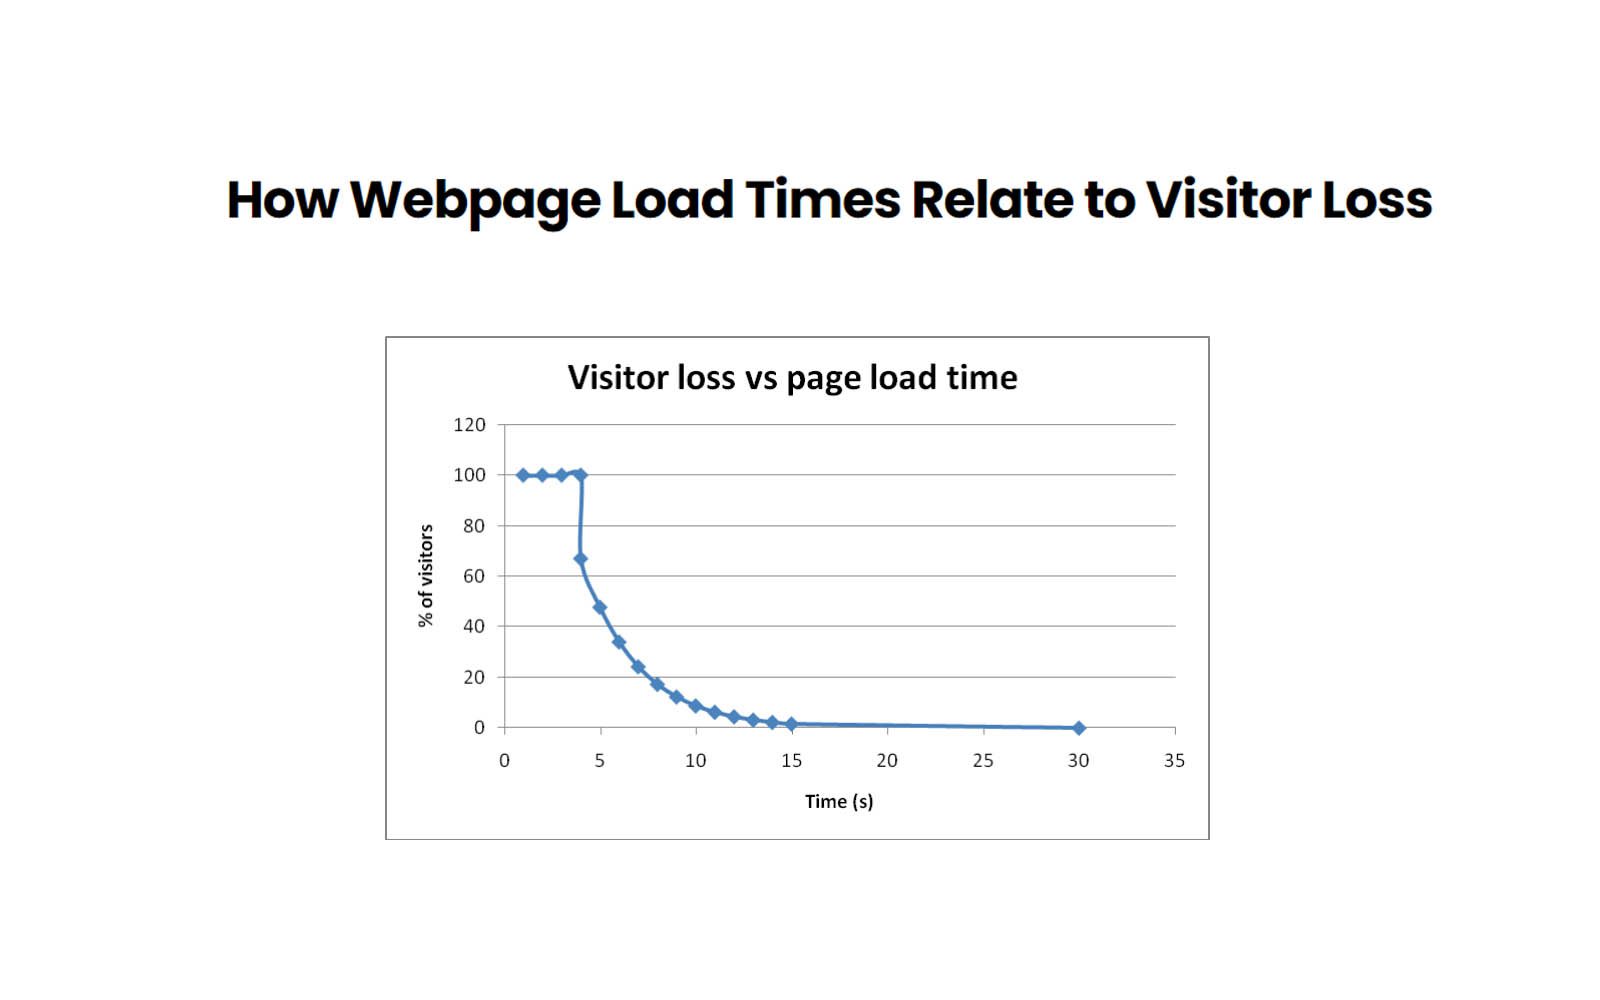 How Webpage Load Times Relate to Visitor Loss